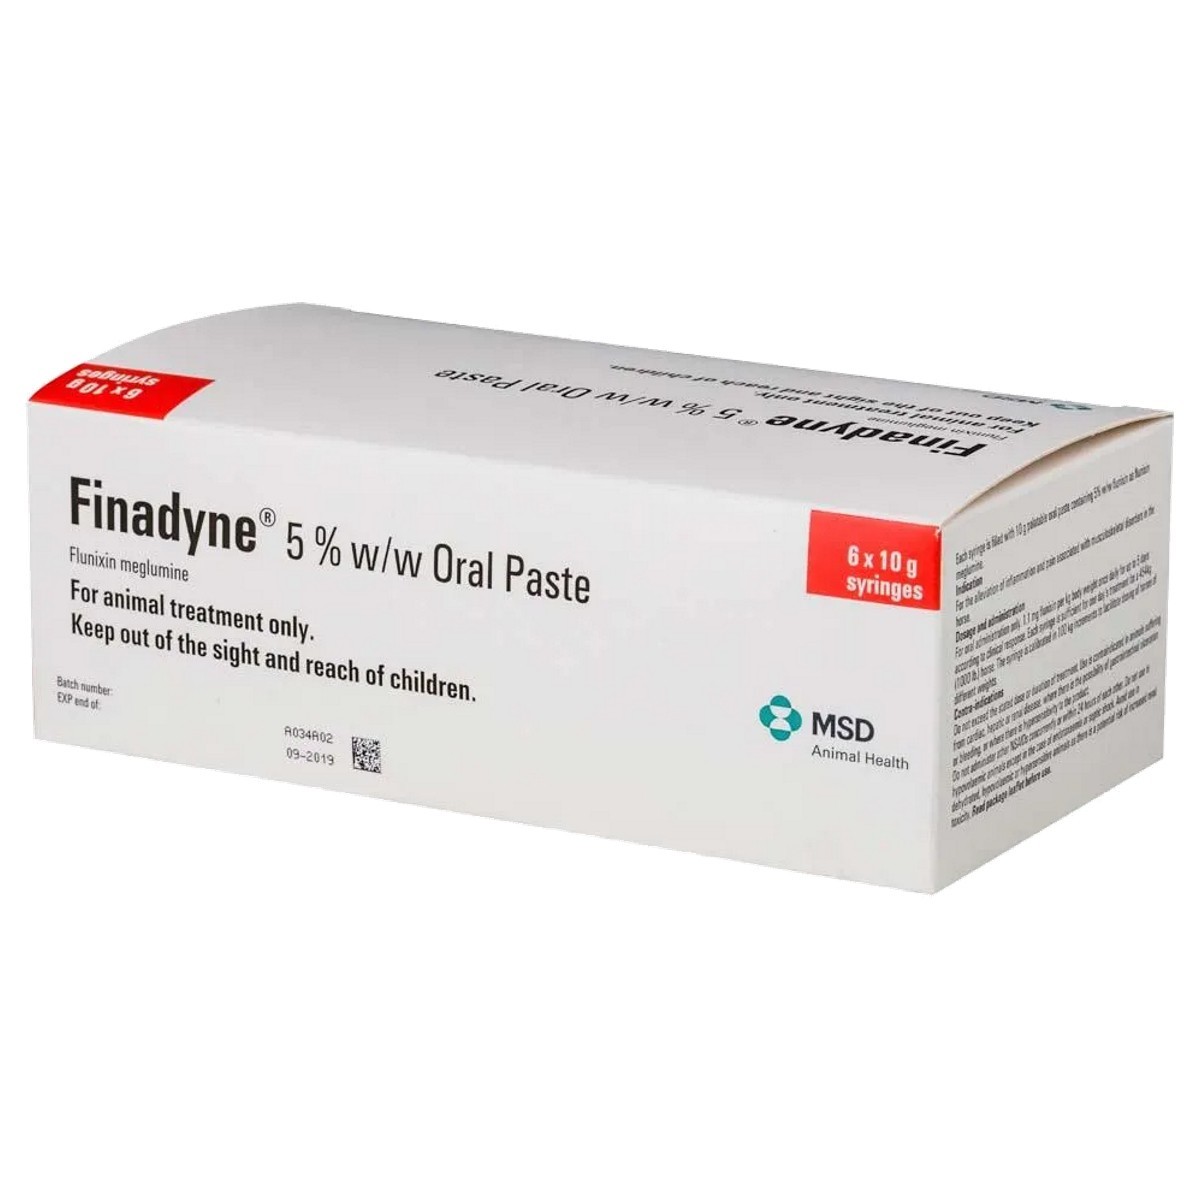 Finadyne 5% w/w Oral Paste for Horses - From £